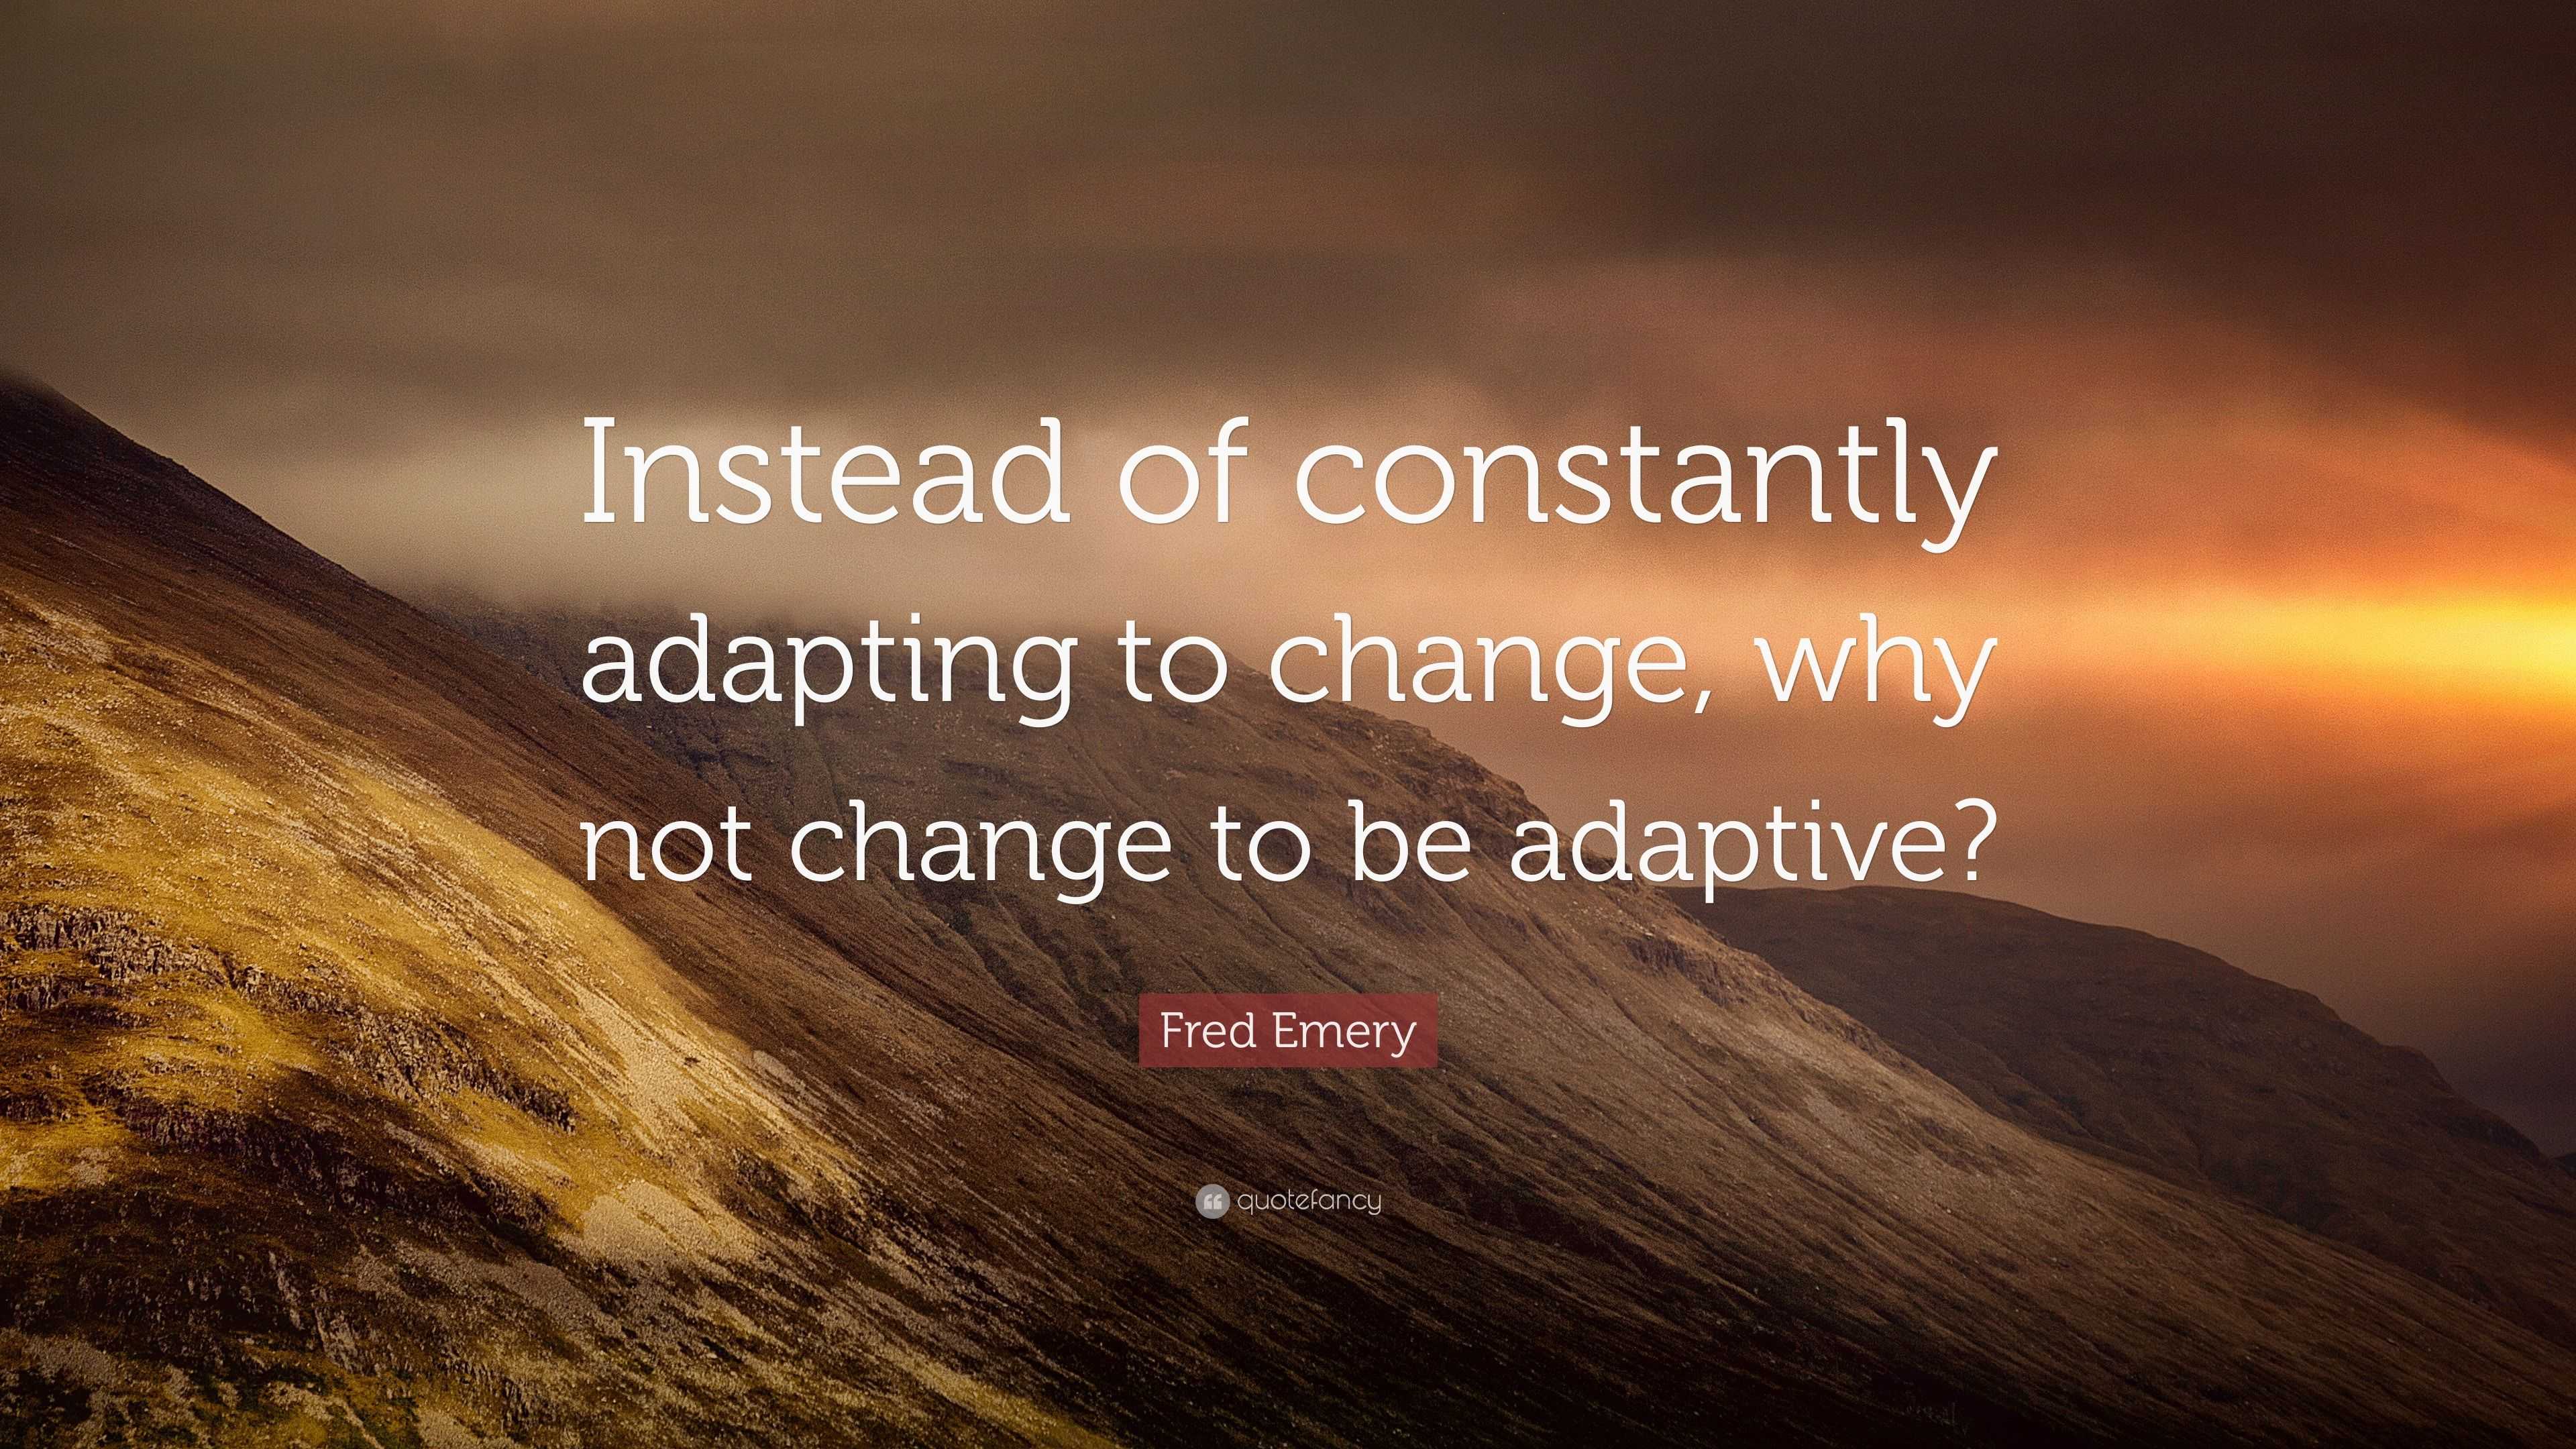 Fred Emery Quote: “Instead of constantly adapting to change, why not